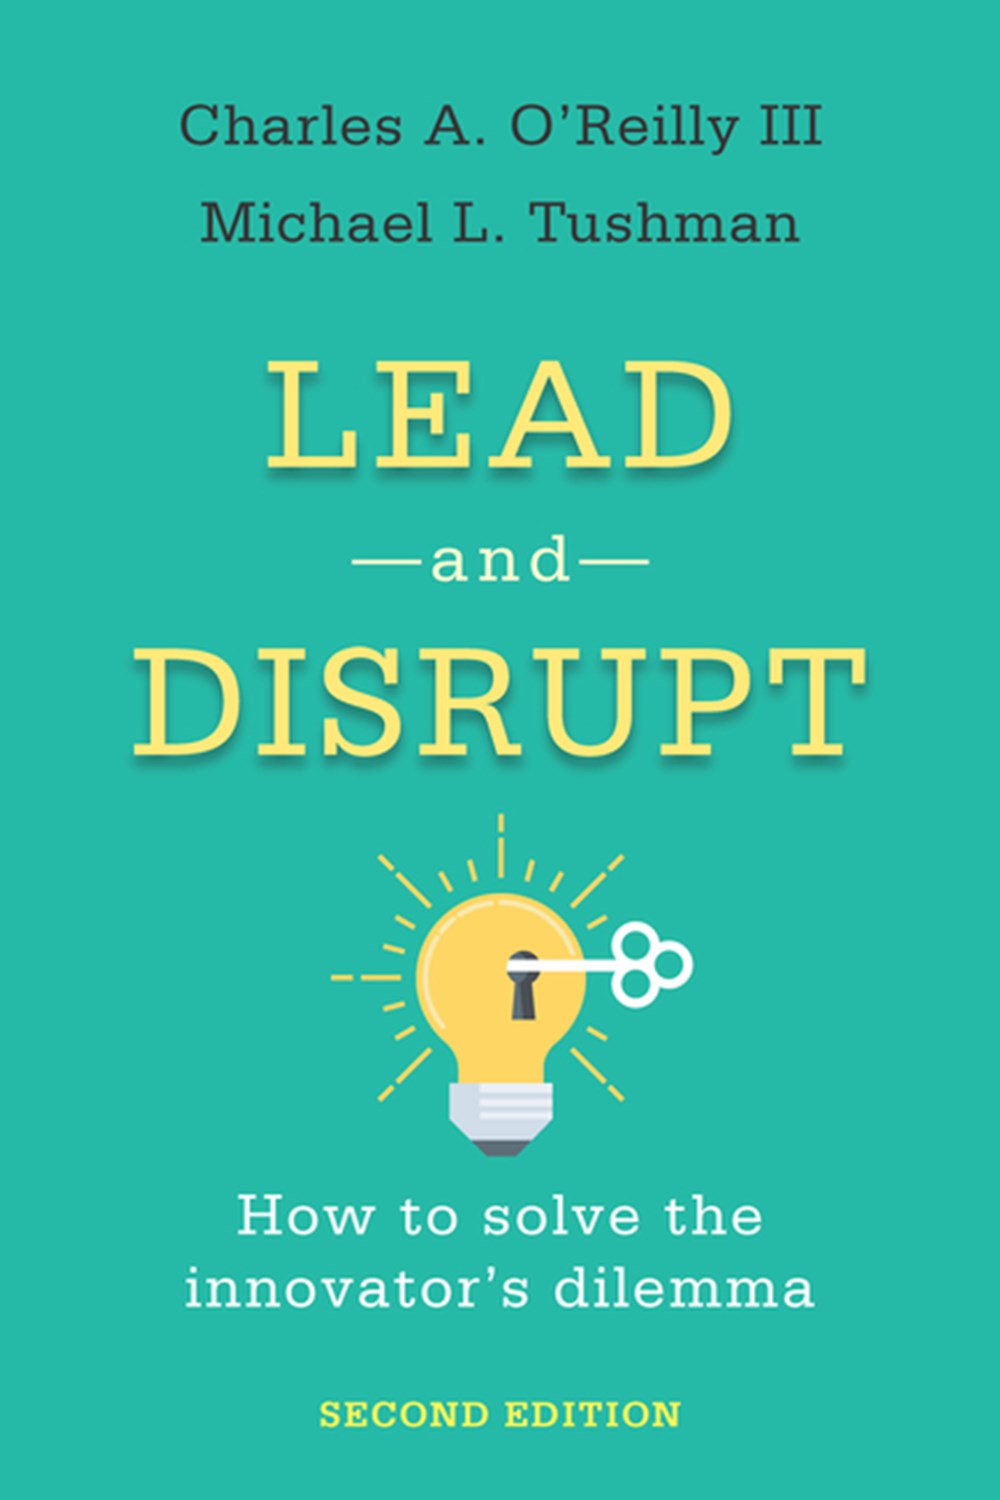 Lead and Disrupt: How to Solve the Innovator's Dilemma, Second Edition